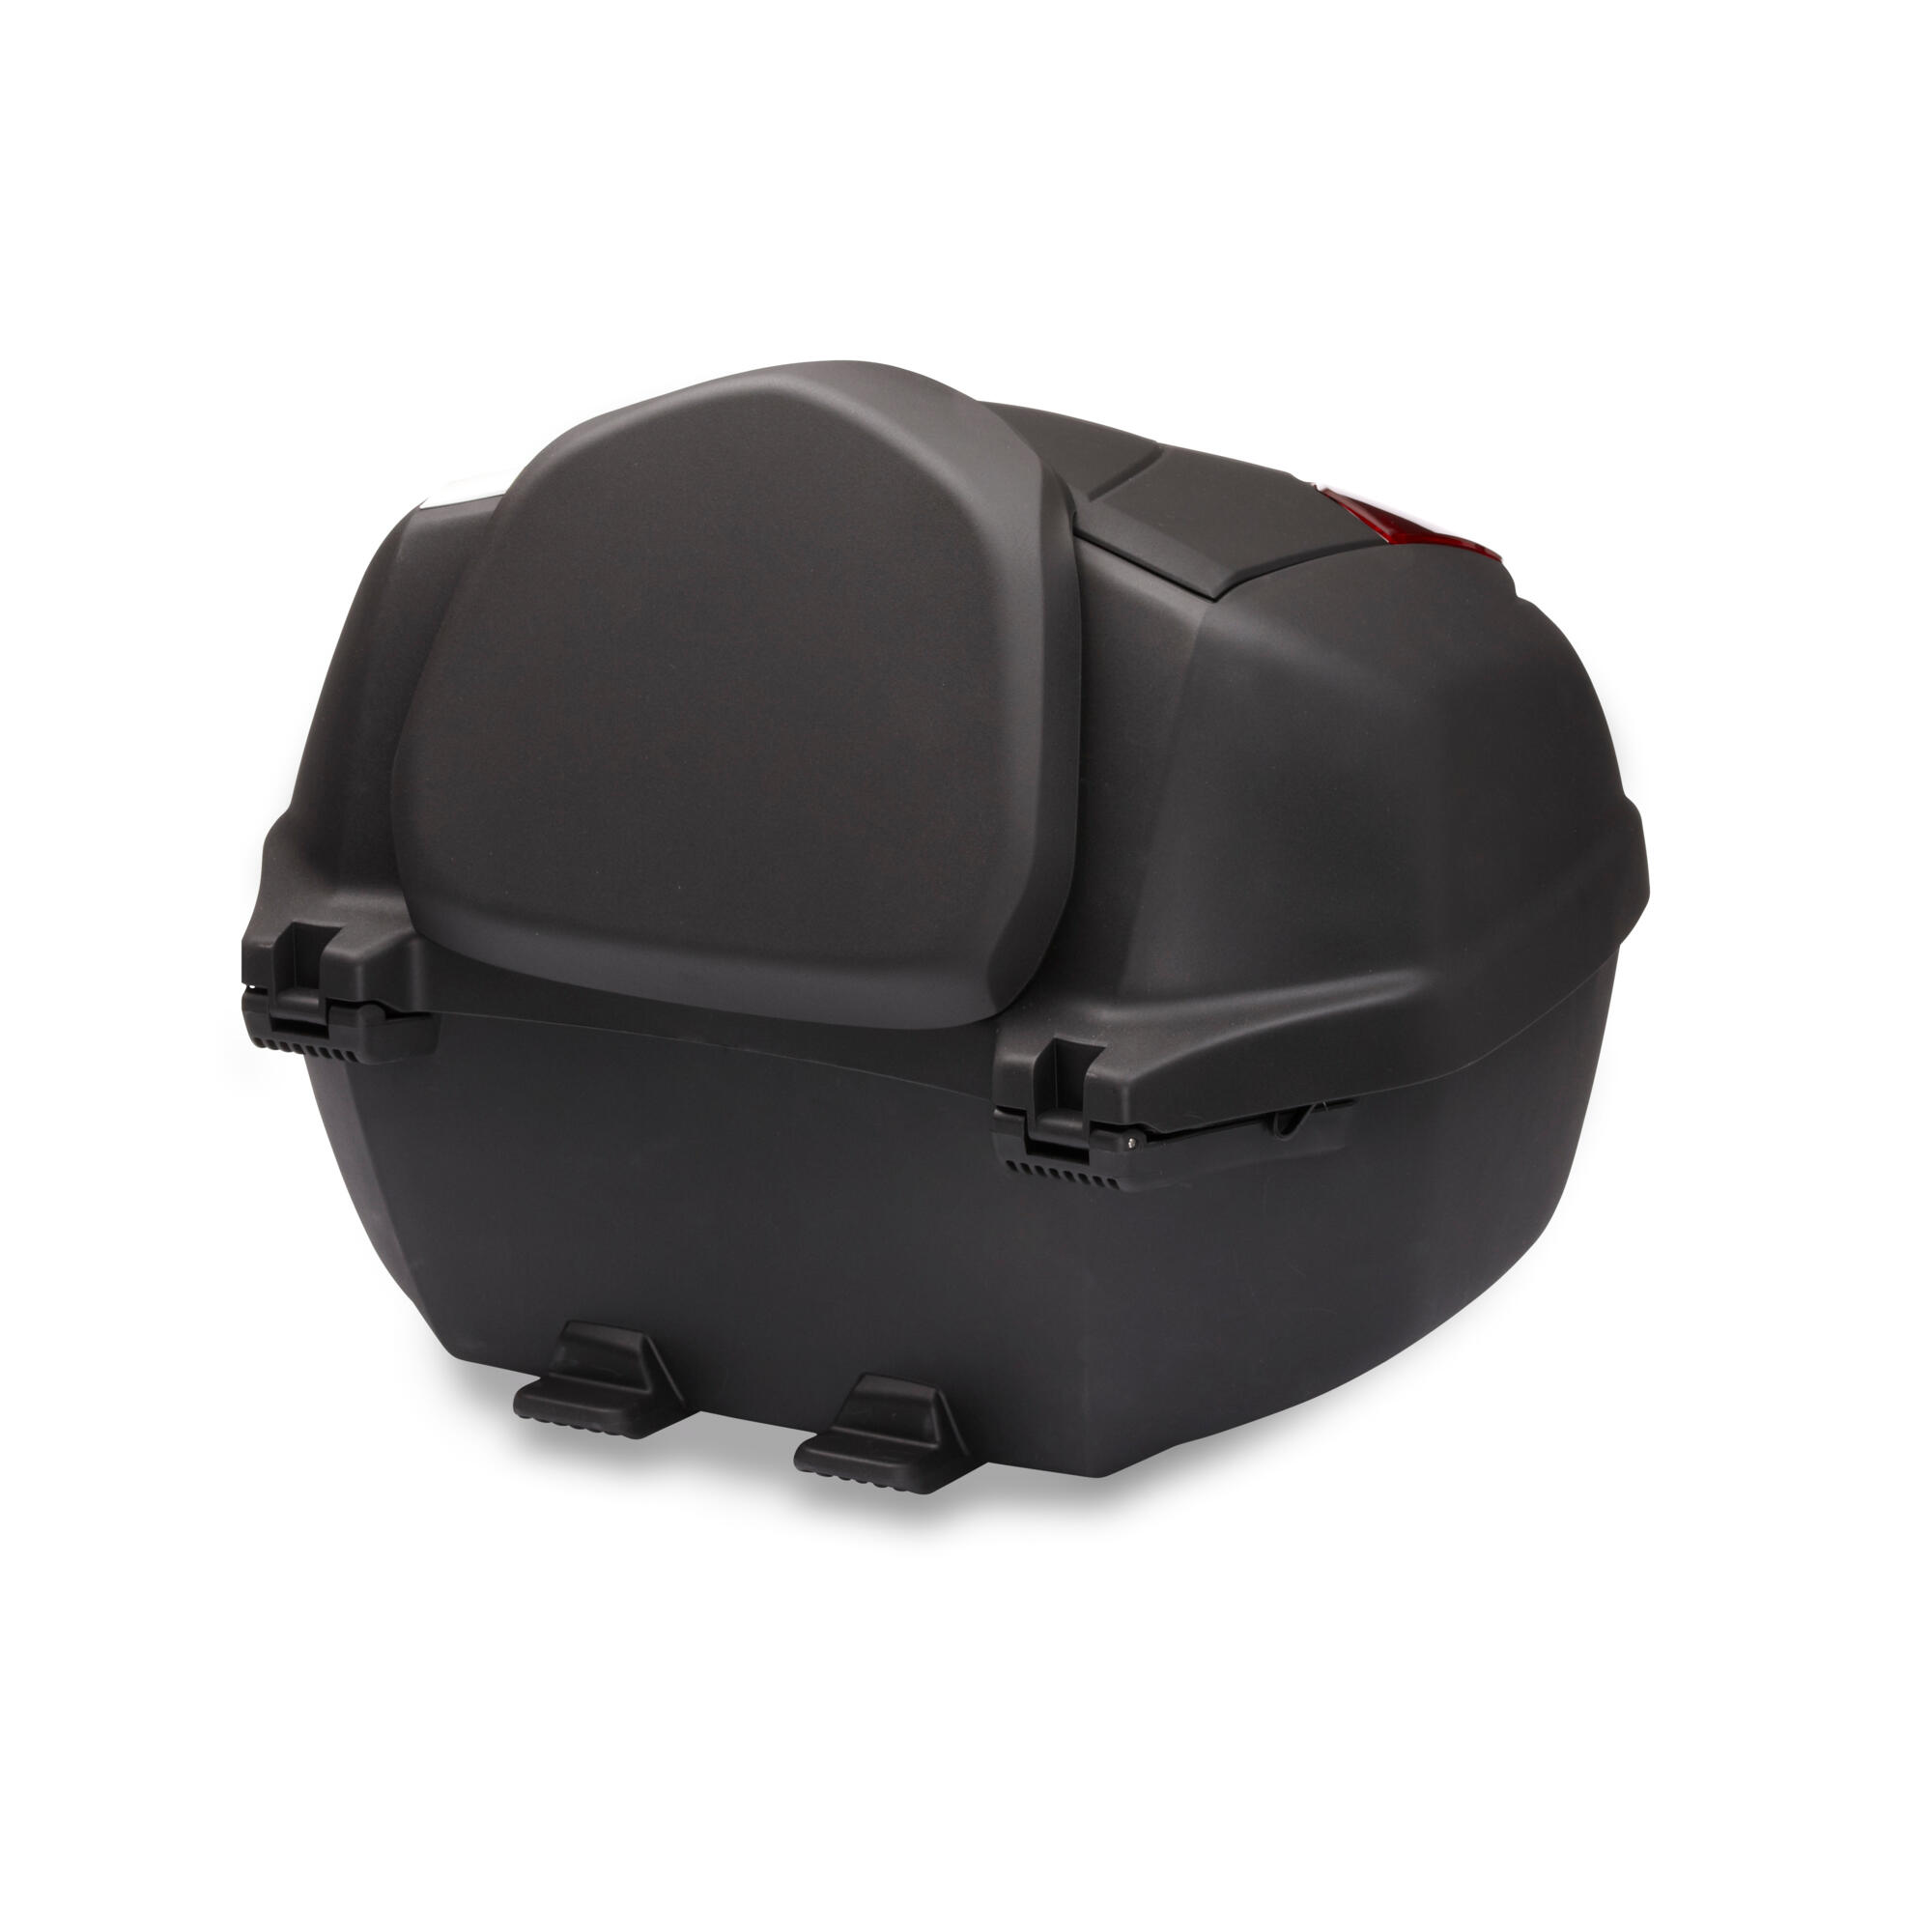 Tracer 700: Urban Pack  Featuring a 39 Litre top case and USB